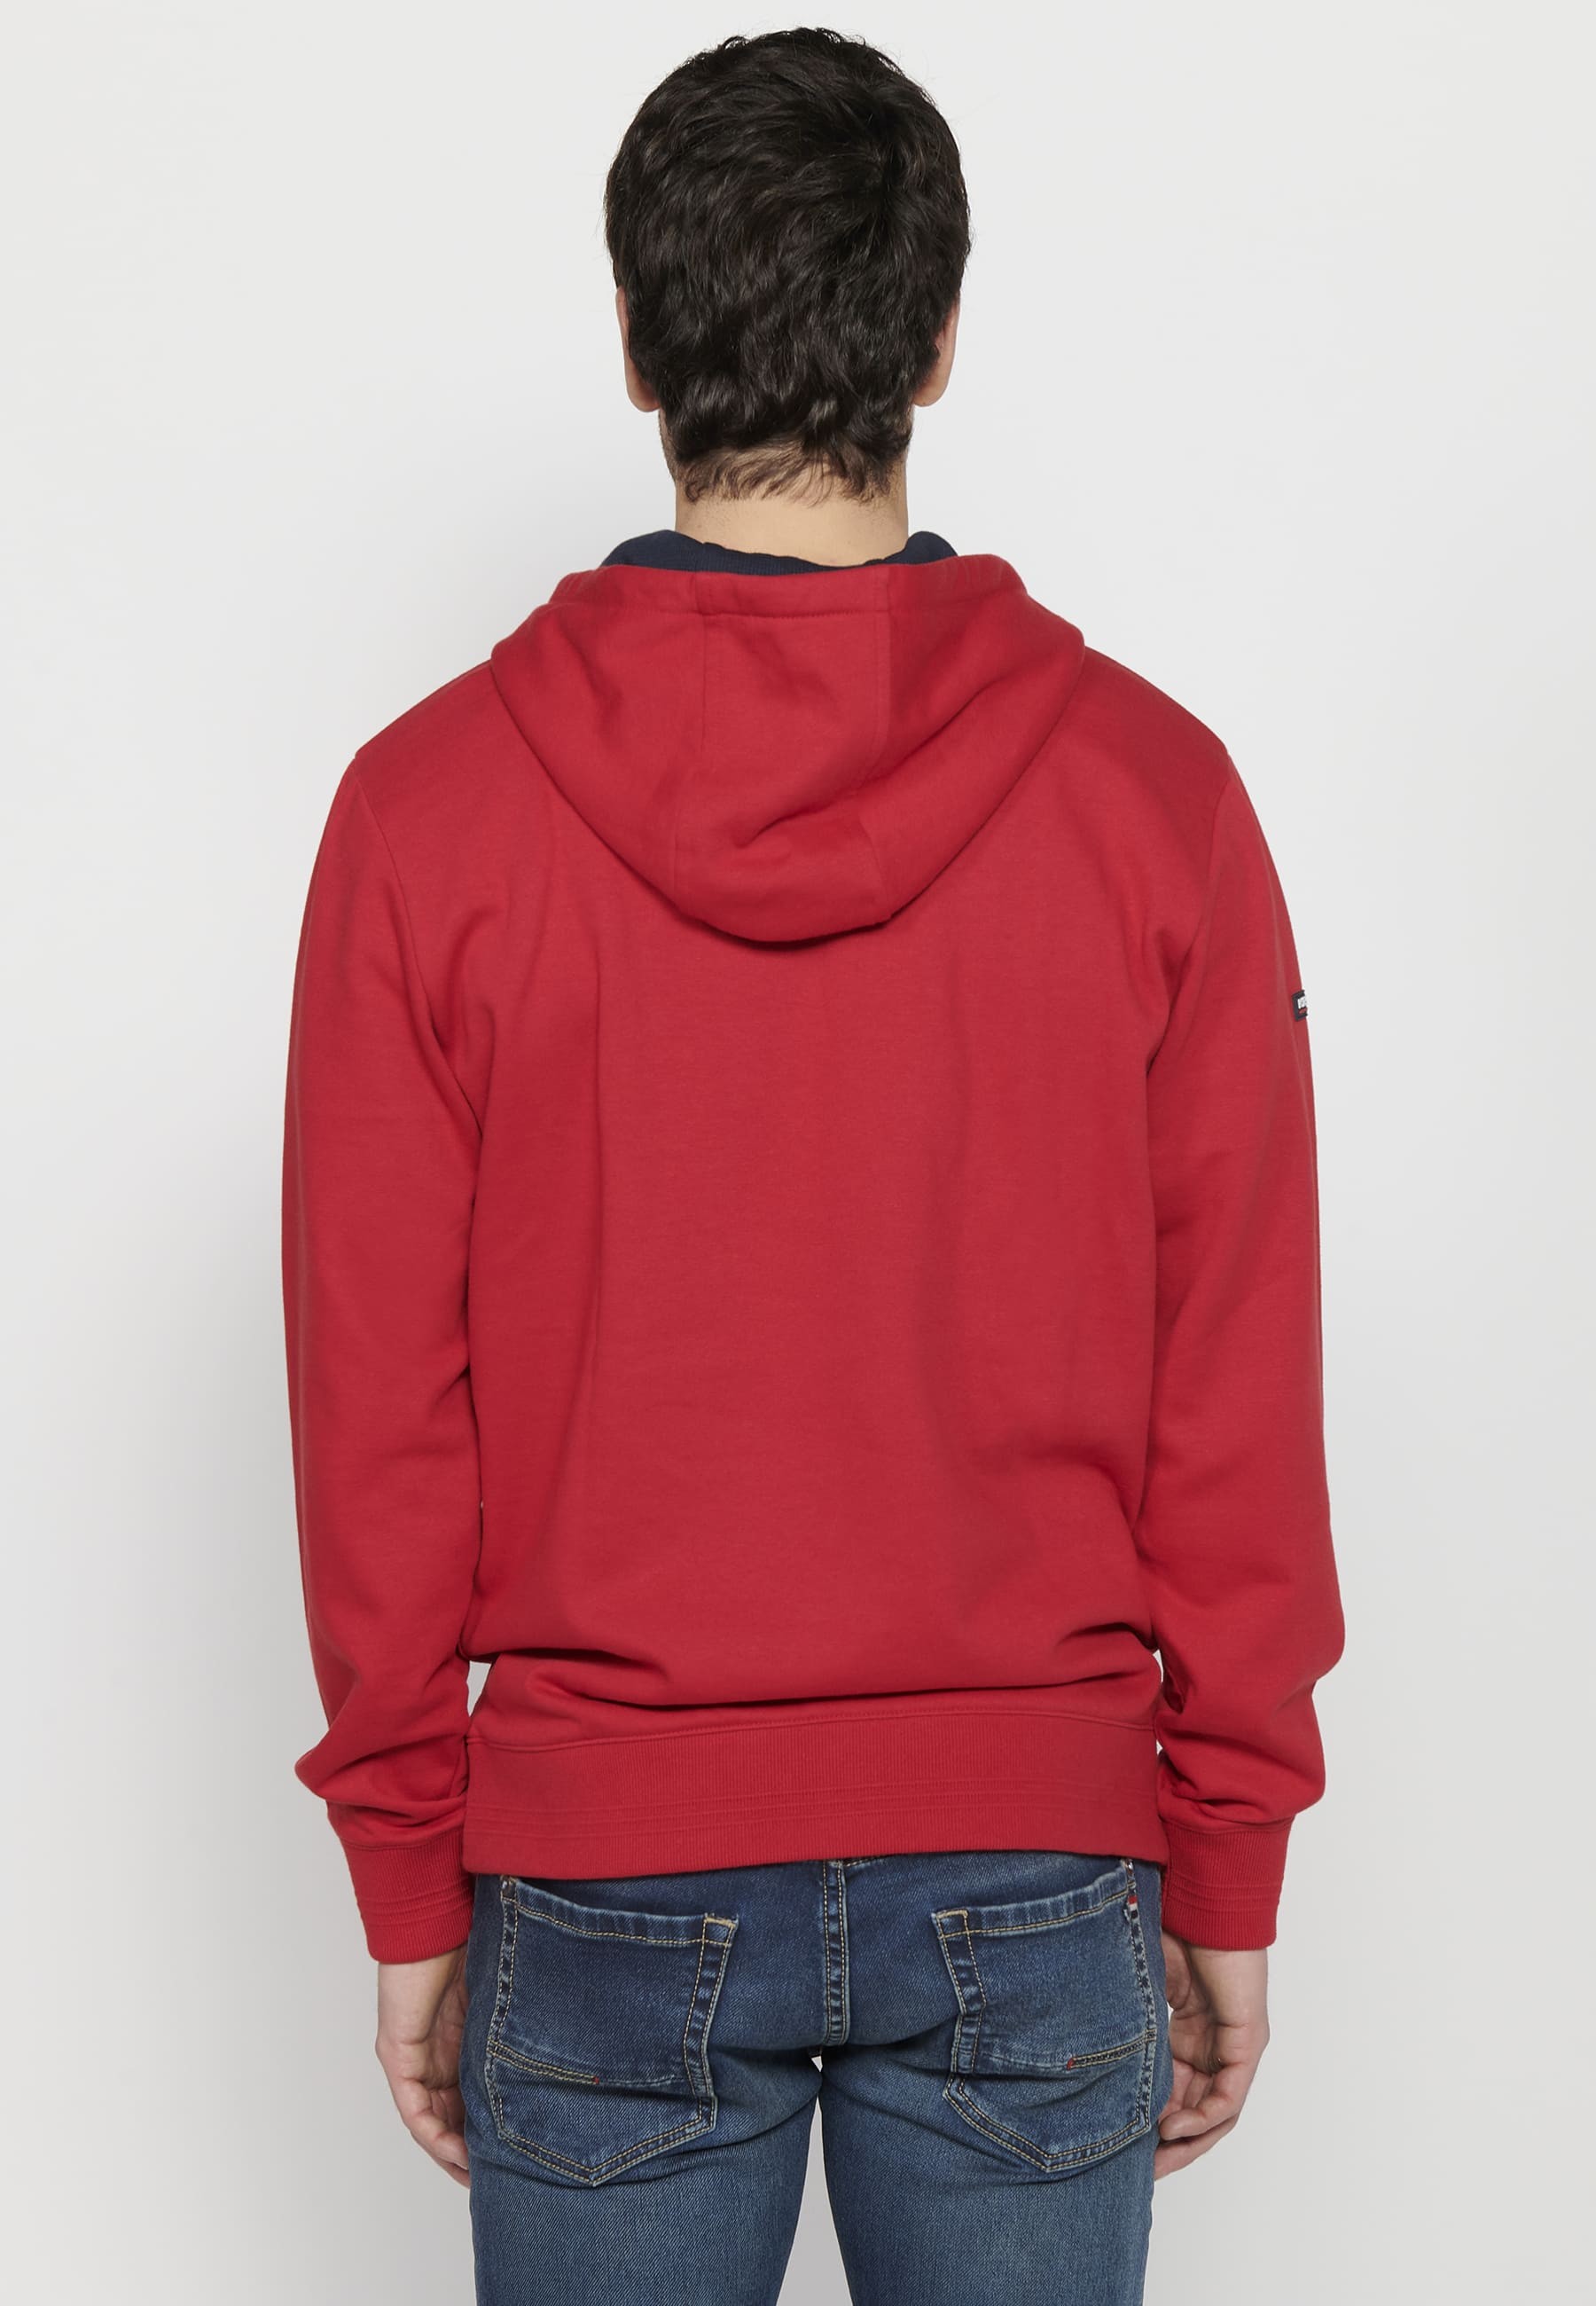 Men's Red Color Long Sleeve Hooded Sweatshirt with Front Embossed Detail 8